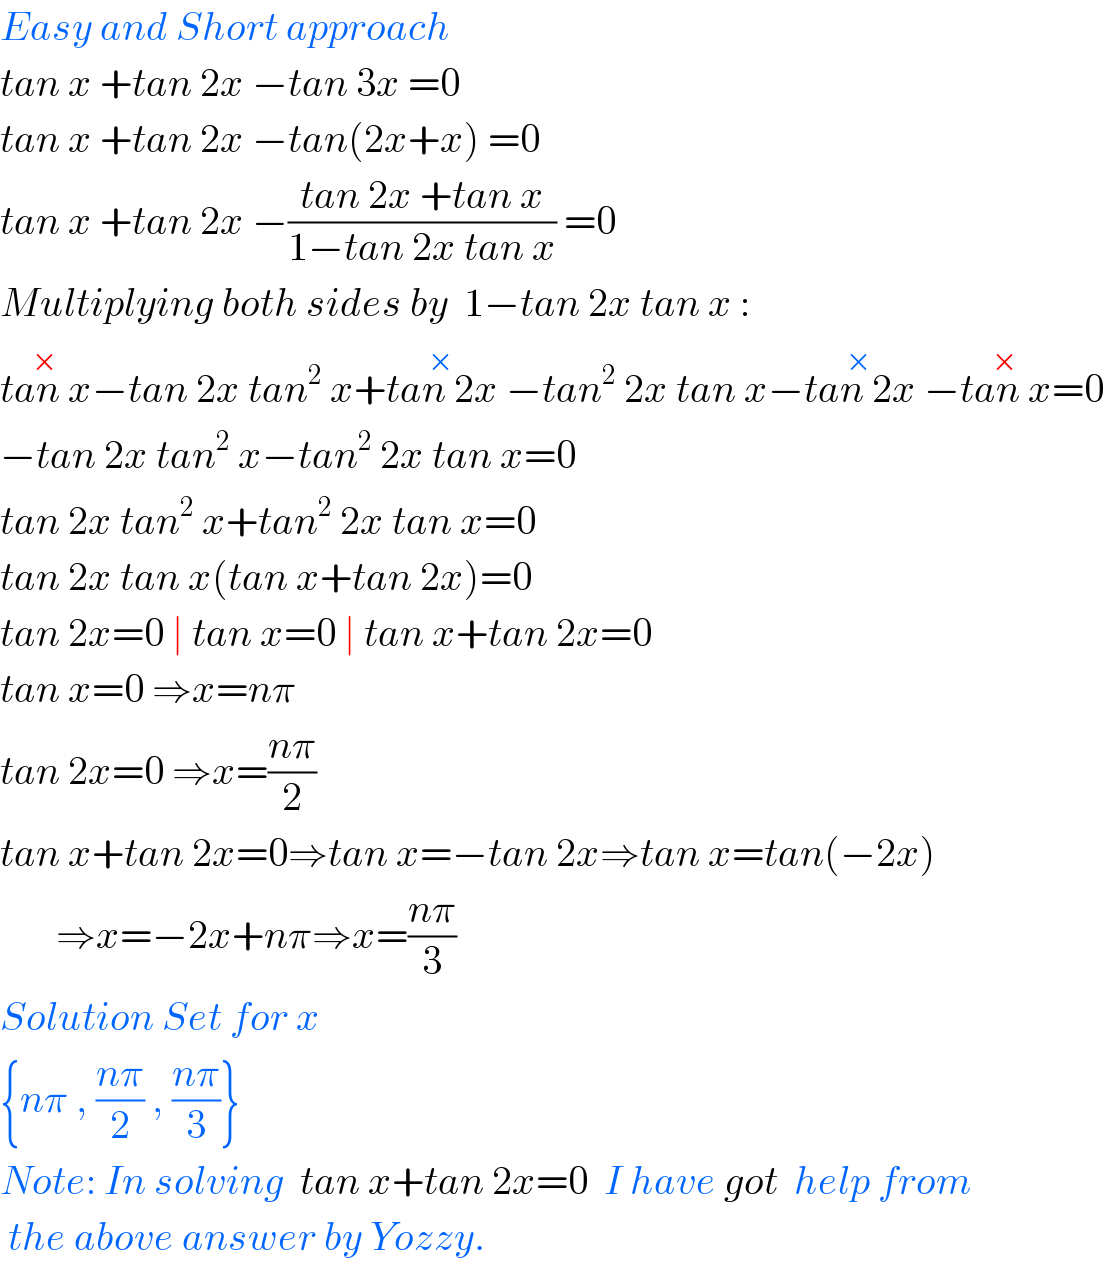 Easy and Short approach  tan x +tan 2x −tan 3x =0  tan x +tan 2x −tan(2x+x) =0  tan x +tan 2x −((tan 2x +tan x)/(1−tan 2x tan x)) =0  Multiplying both sides by  1−tan 2x tan x :  tan x^(×) −tan 2x tan^2  x+tan 2x^(×)  −tan^2  2x tan x−tan 2x^(×)  −tan x^(×) =0  −tan 2x tan^2  x−tan^2  2x tan x=0  tan 2x tan^2  x+tan^2  2x tan x=0  tan 2x tan x(tan x+tan 2x)=0  tan 2x=0 ∣ tan x=0 ∣ tan x+tan 2x=0  tan x=0 ⇒x=nπ  tan 2x=0 ⇒x=((nπ)/2)  tan x+tan 2x=0⇒tan x=−tan 2x⇒tan x=tan(−2x)         ⇒x=−2x+nπ⇒x=((nπ)/3)  Solution Set for x  {nπ , ((nπ)/2) , ((nπ)/3)}  Note: In solving  tan x+tan 2x=0  I have got  help from   the above answer by Yozzy.  